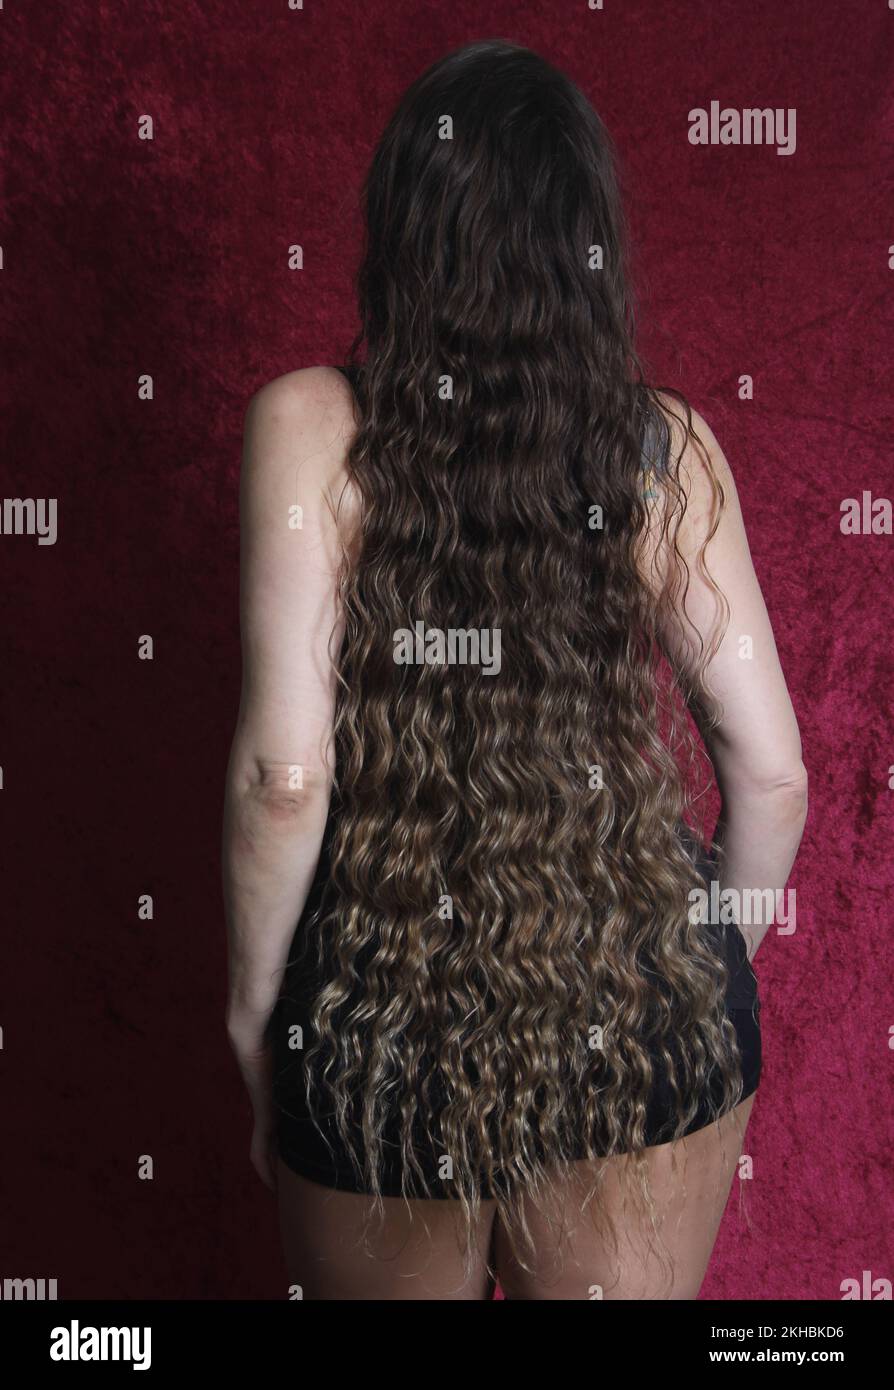 Woman With Natural Long Wavy Hair on Red Velvet Background Stock Photo